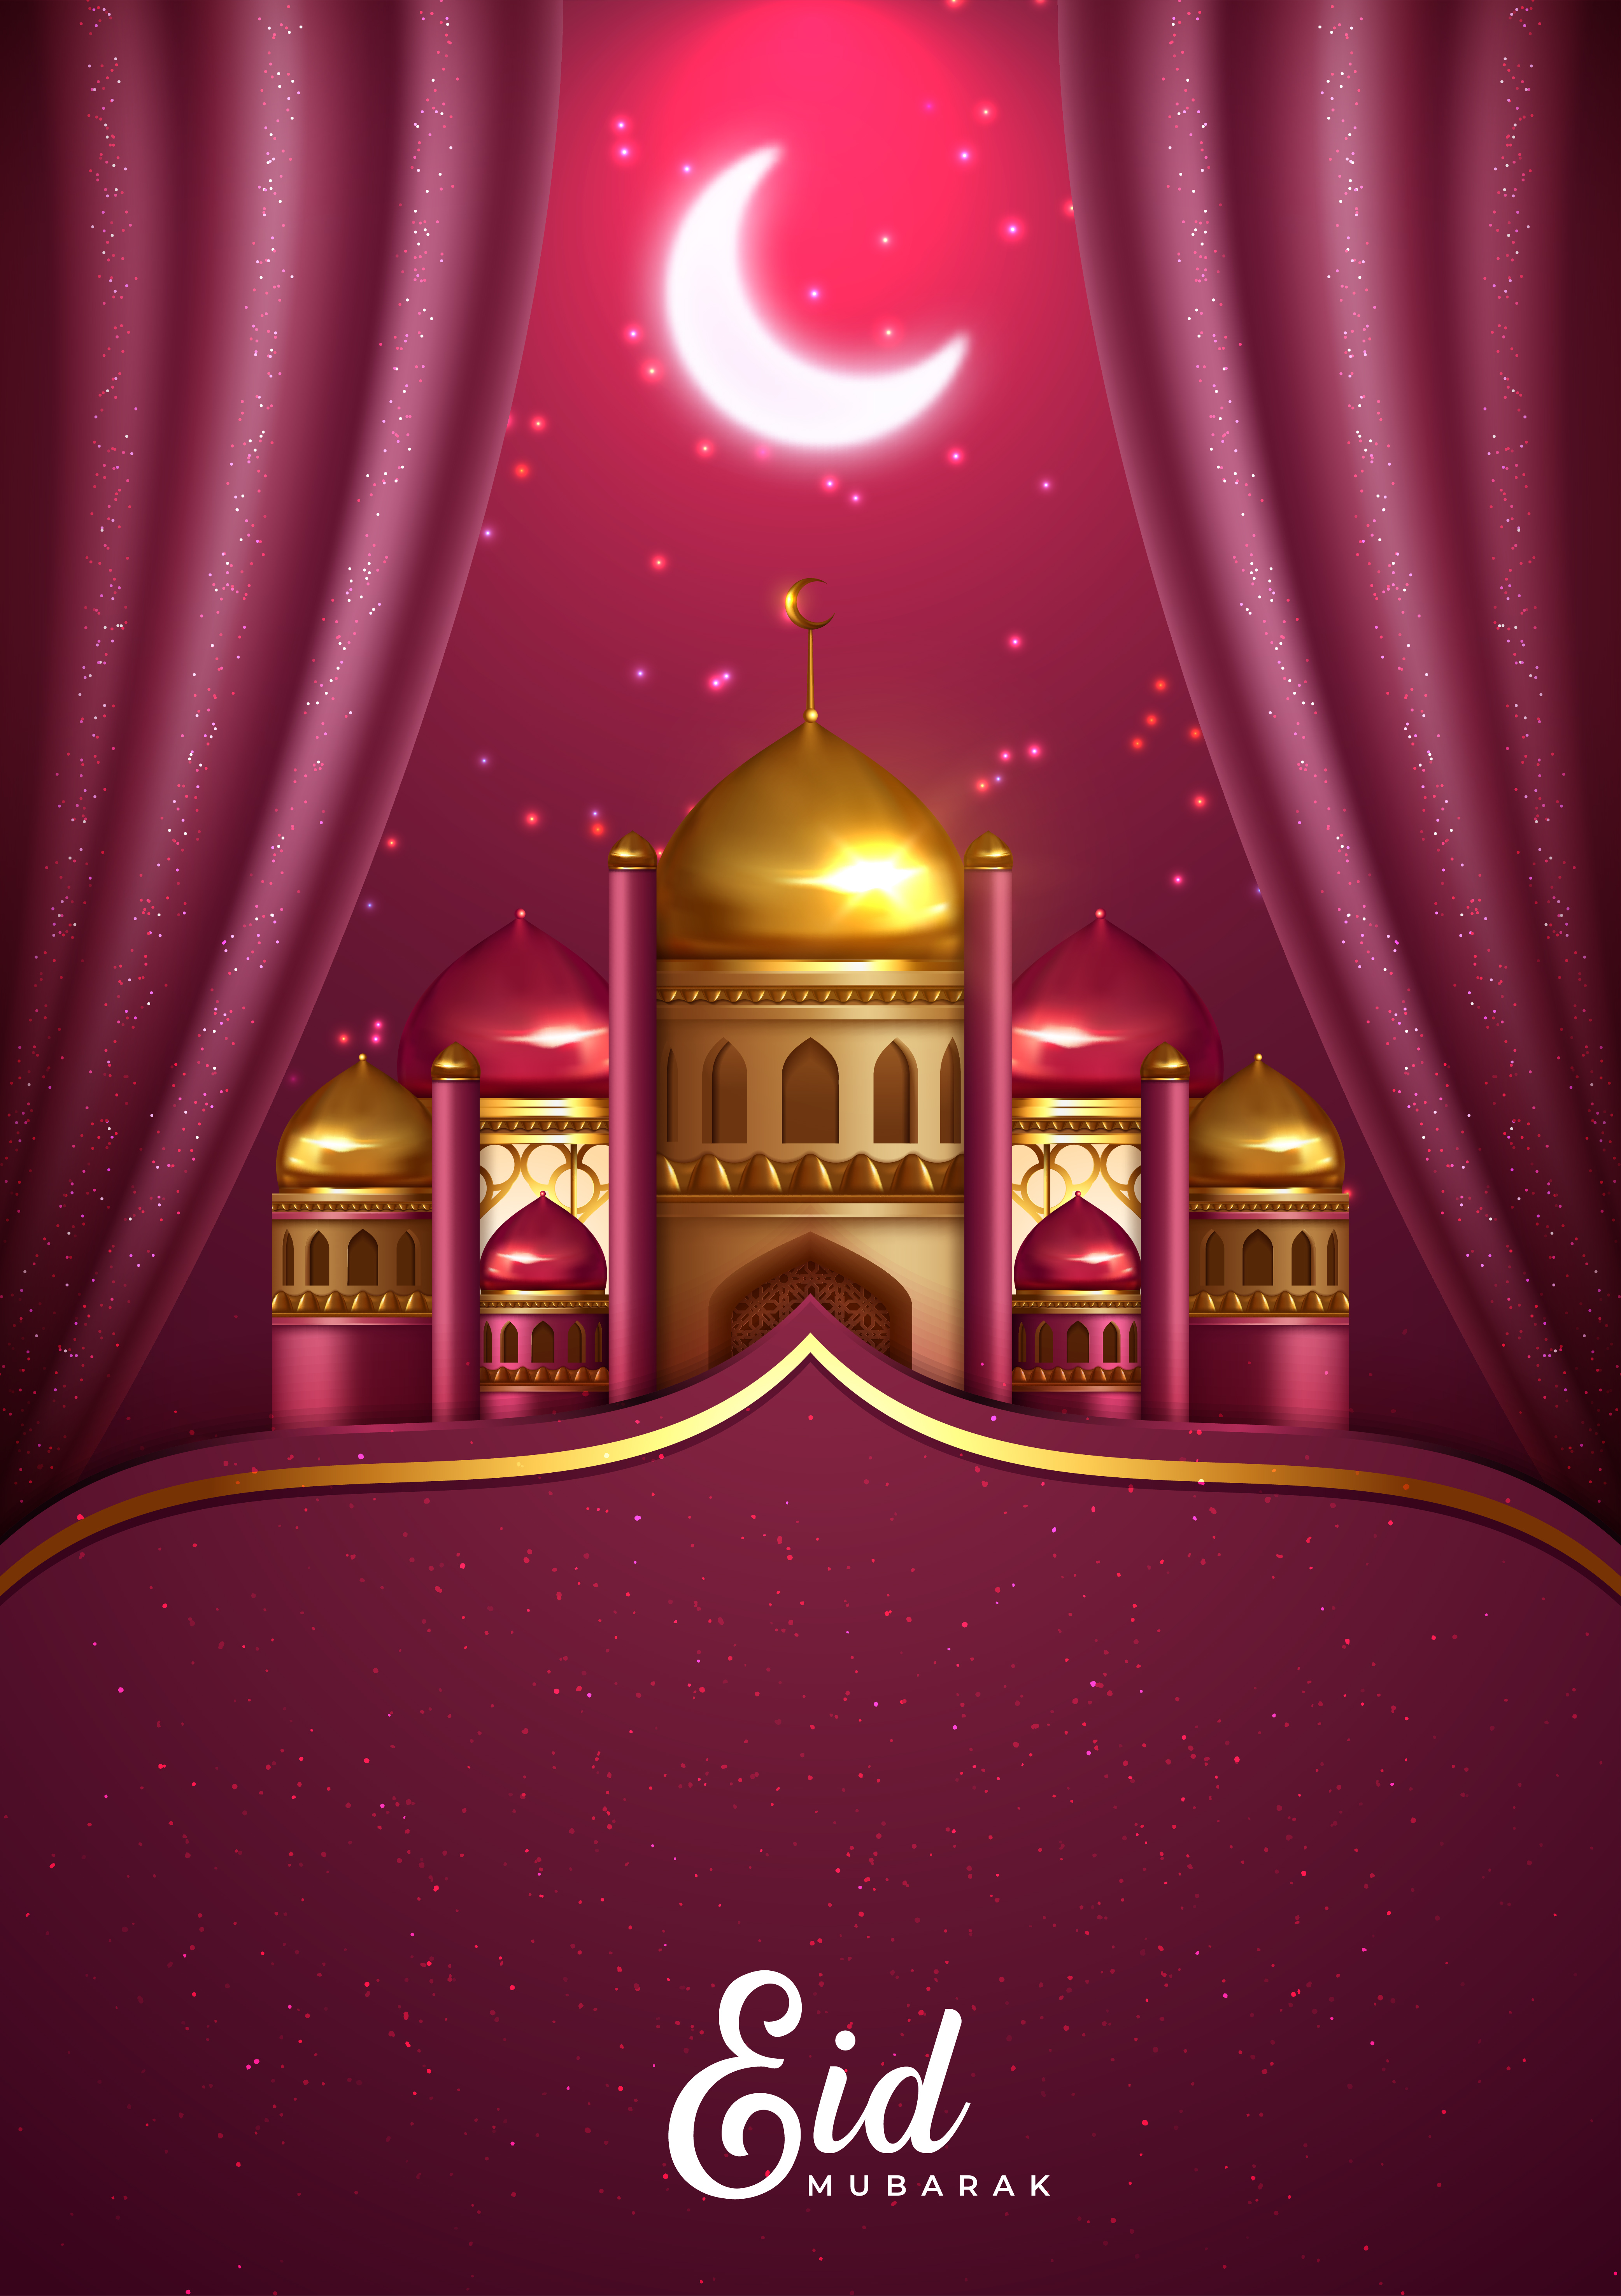 Eid Mubarak Pink with Mosque Greeting Card 999462 - Download Free